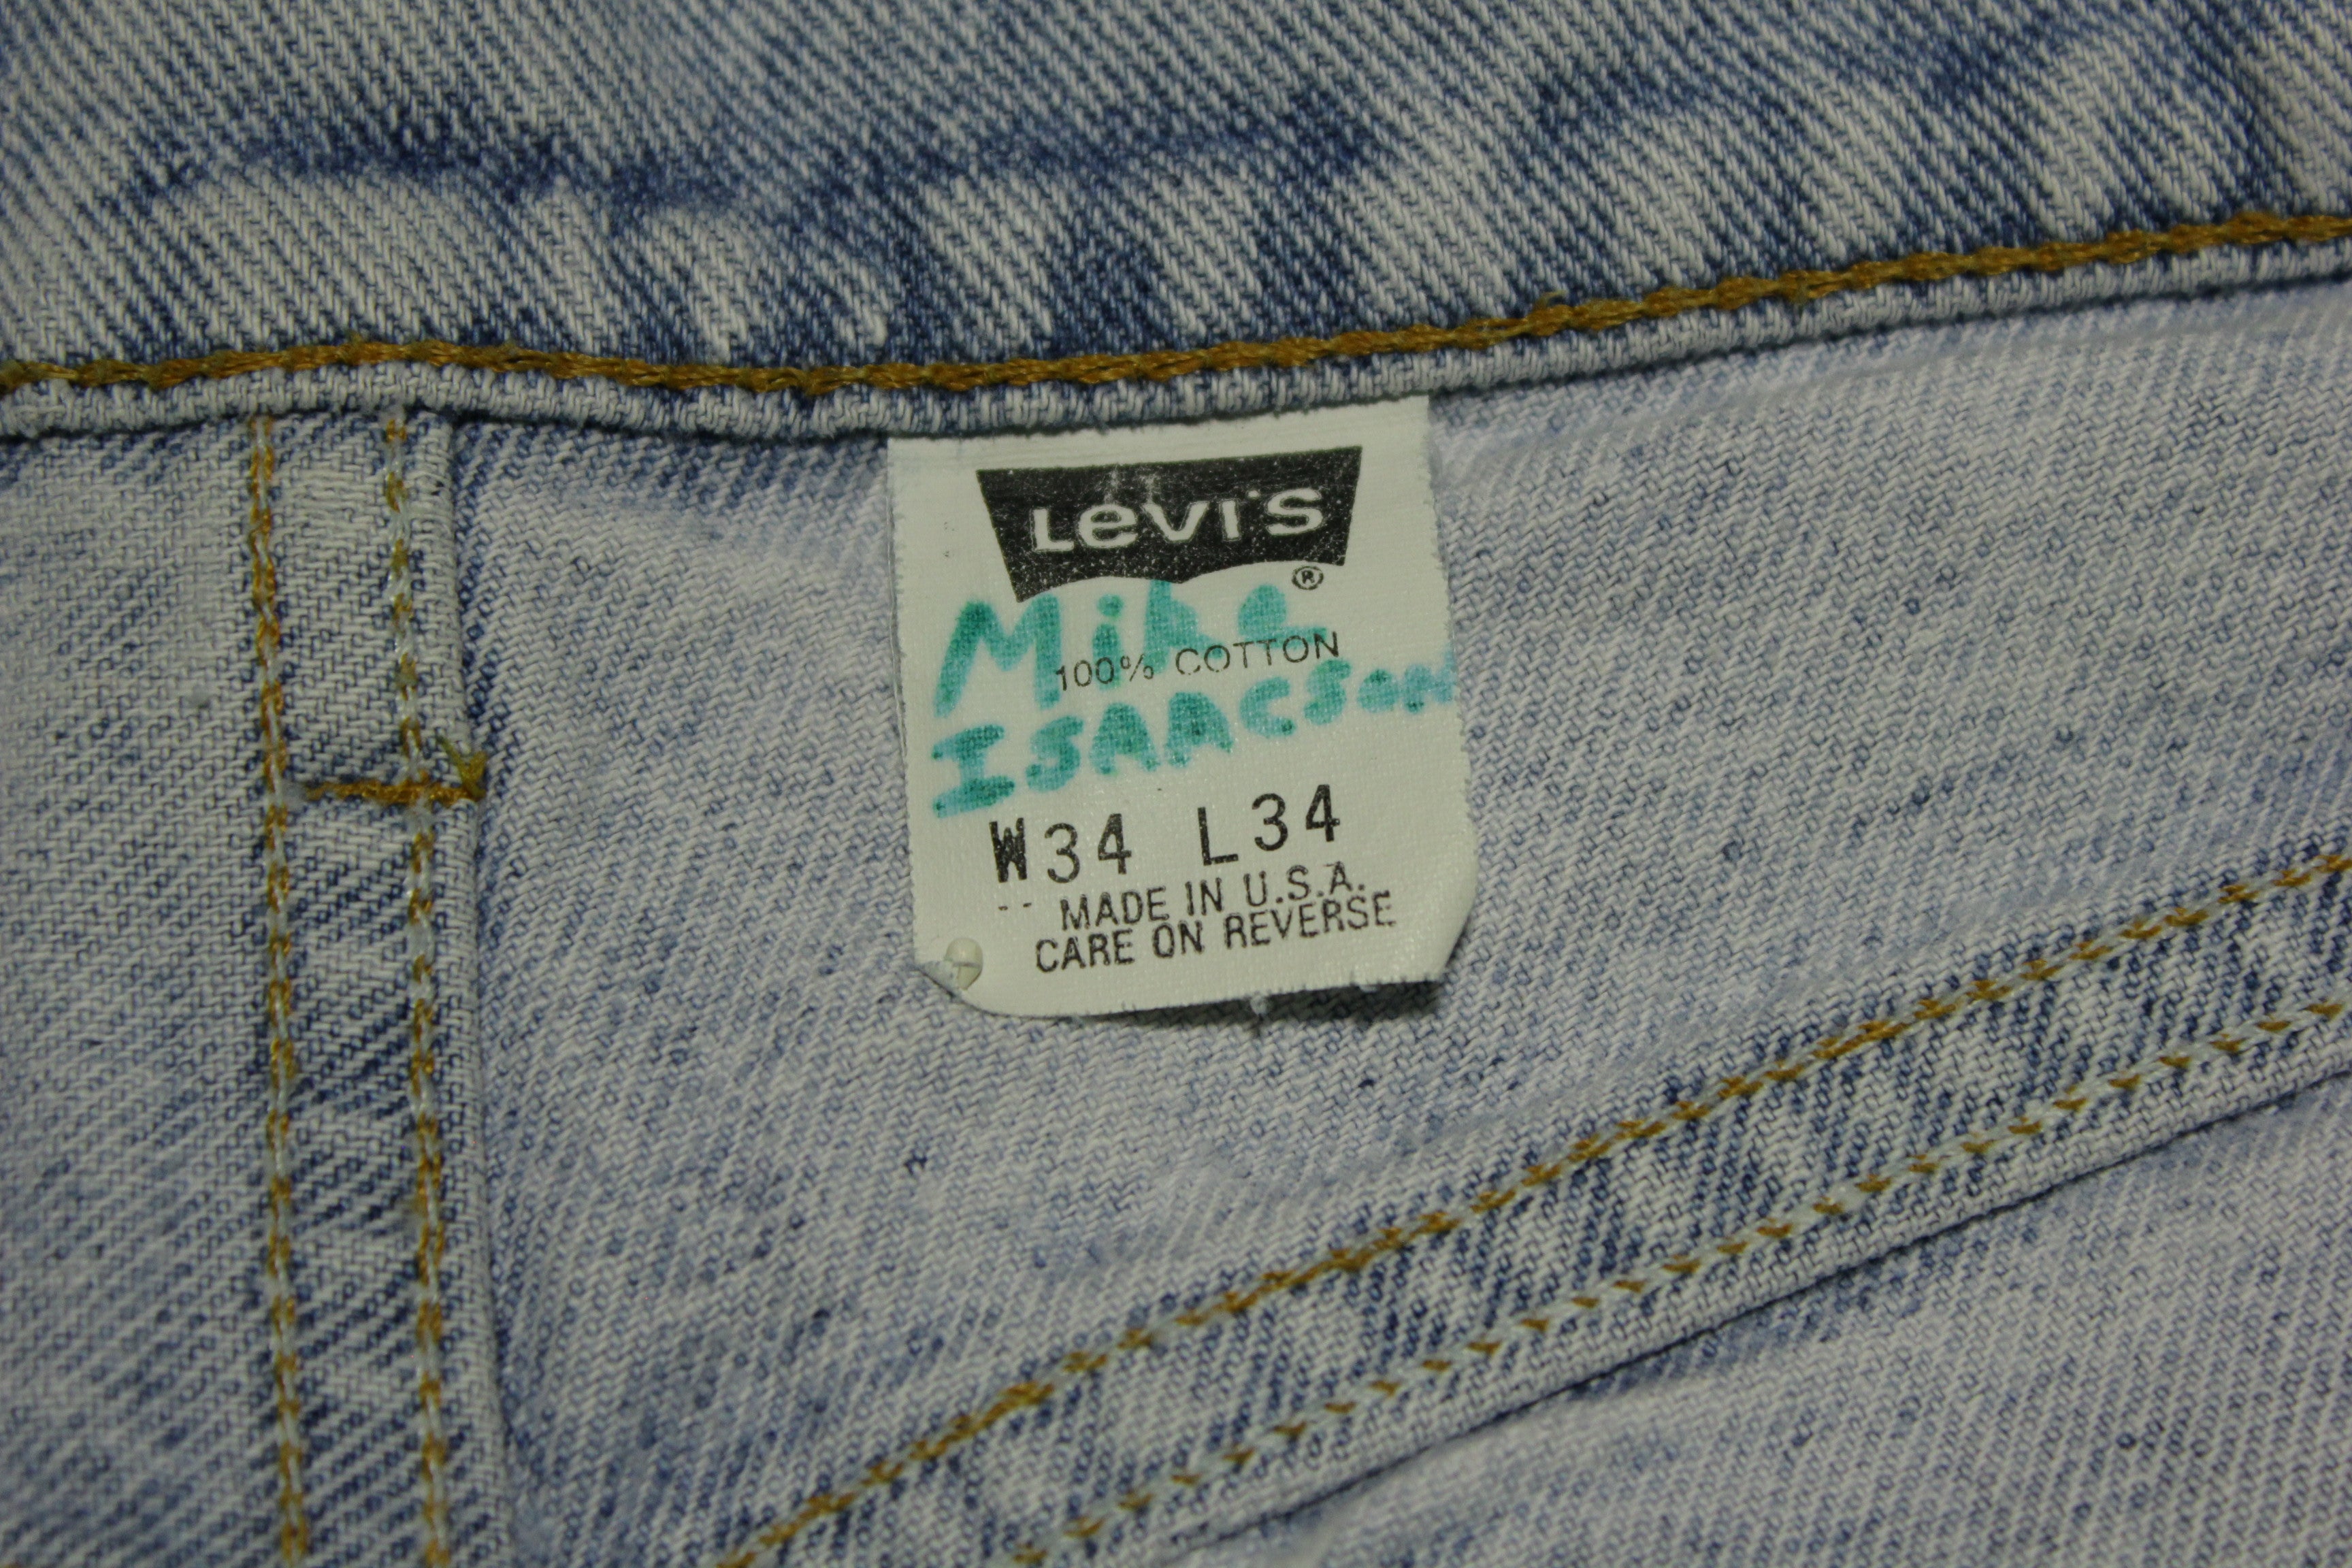 Levis 554 Baggy Fit Vintage Stone Wash Made in USA 90s Denim Jeans